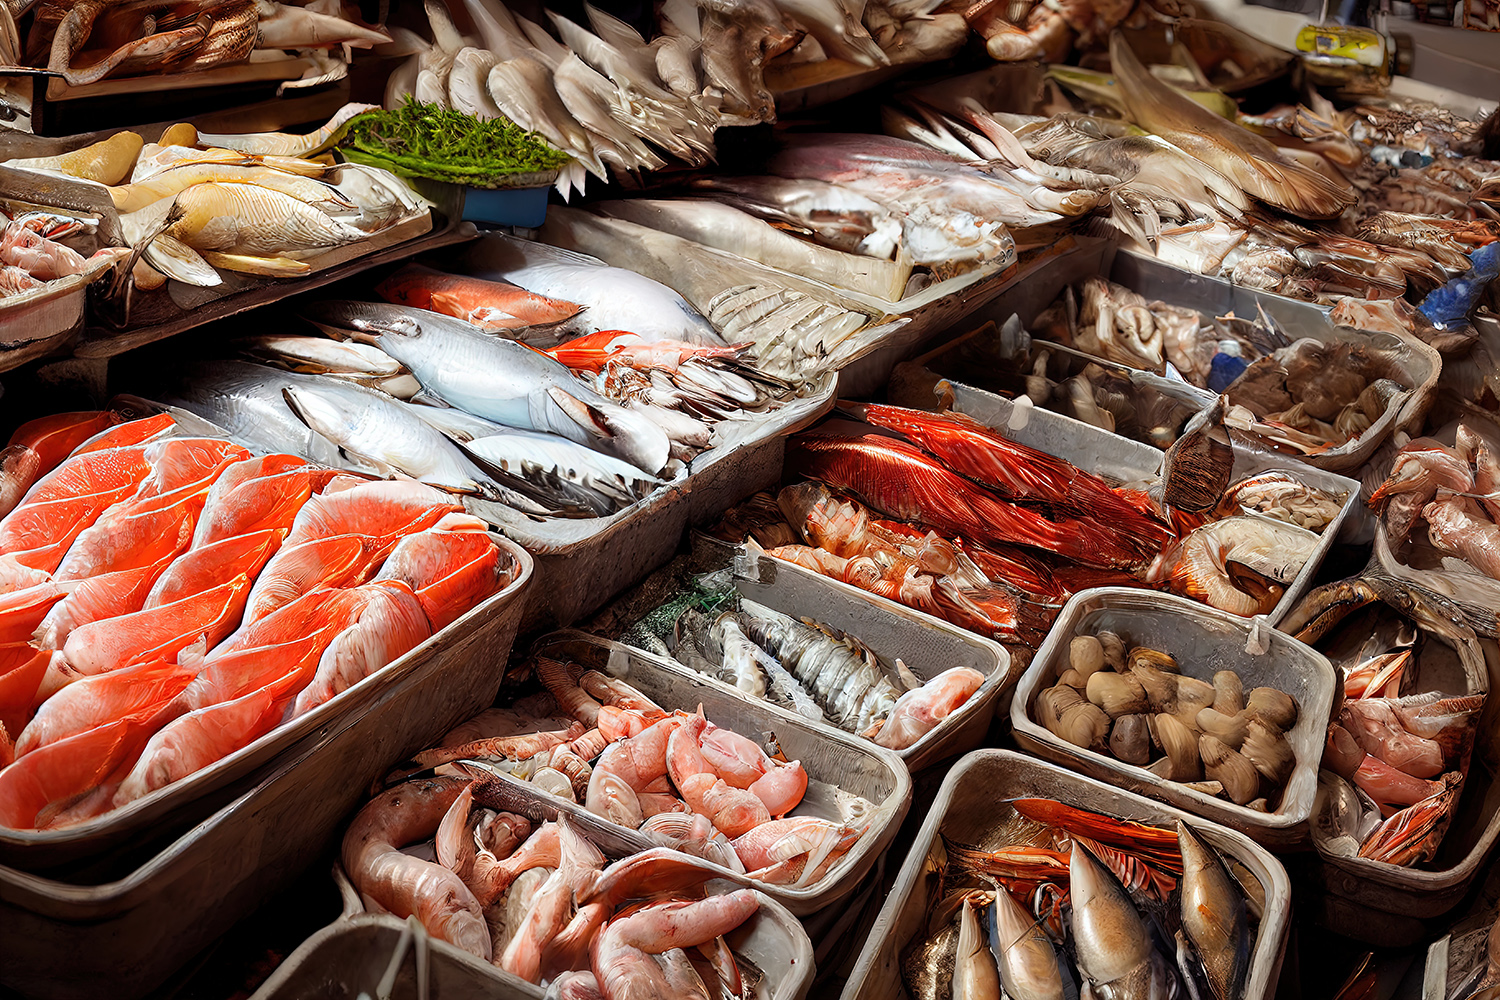 The ideal venue for customers to purchase fresh fish, vegetables, and Japanese cuisine products is Tsukiji Fish Market